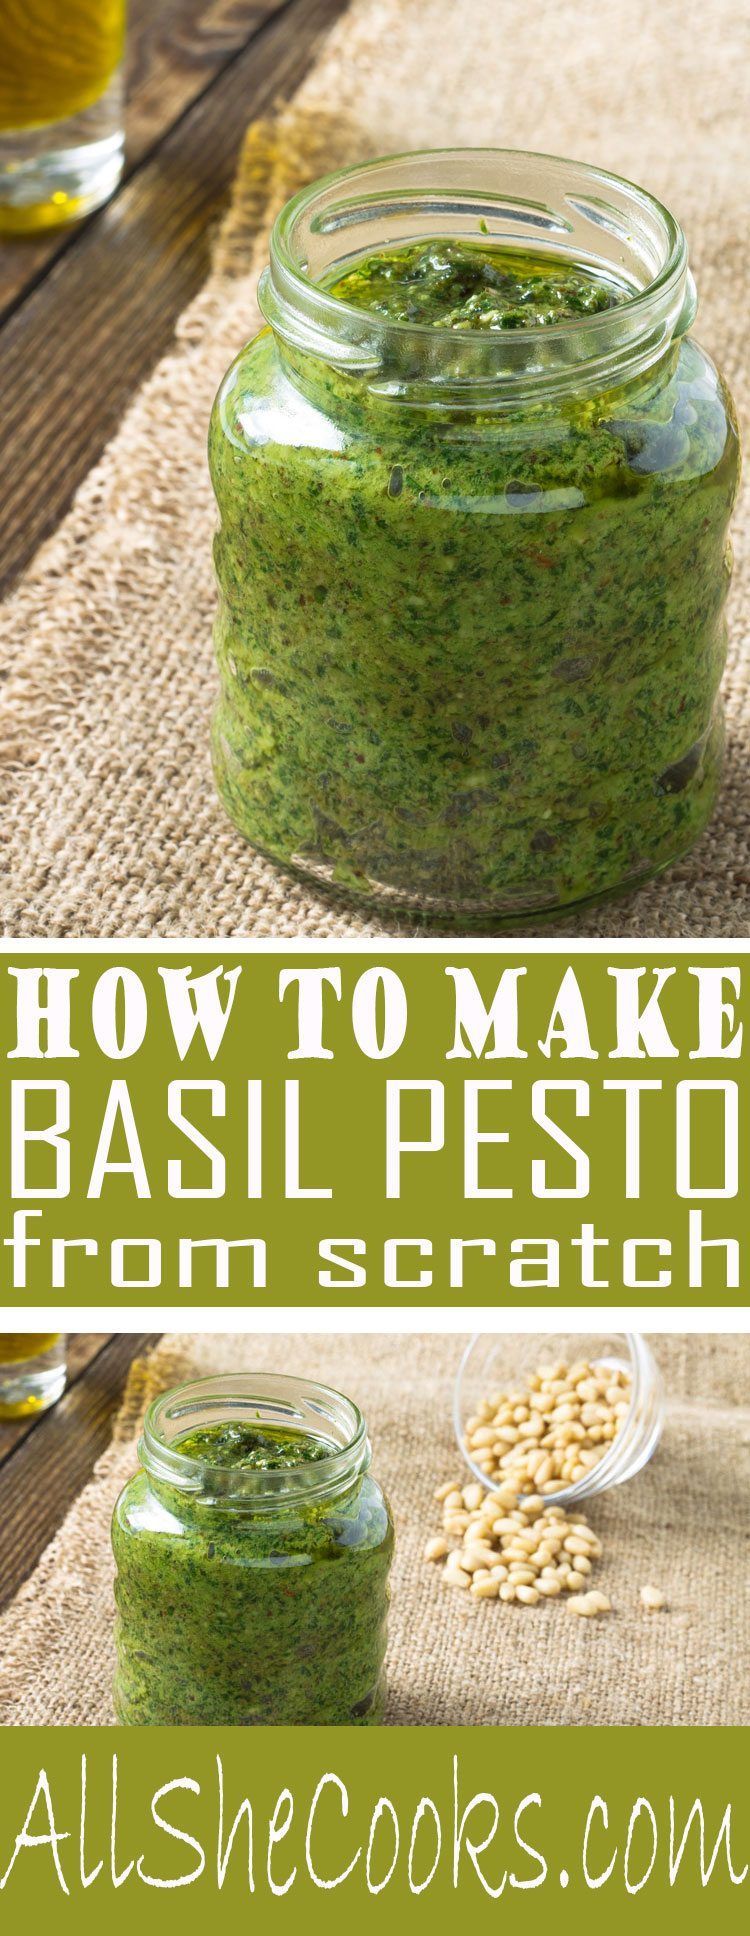 Learn how to make Basil Pesto from scratch. Pesto can be used in a wide variety of recipes to add fresh seasoning flavor, as well